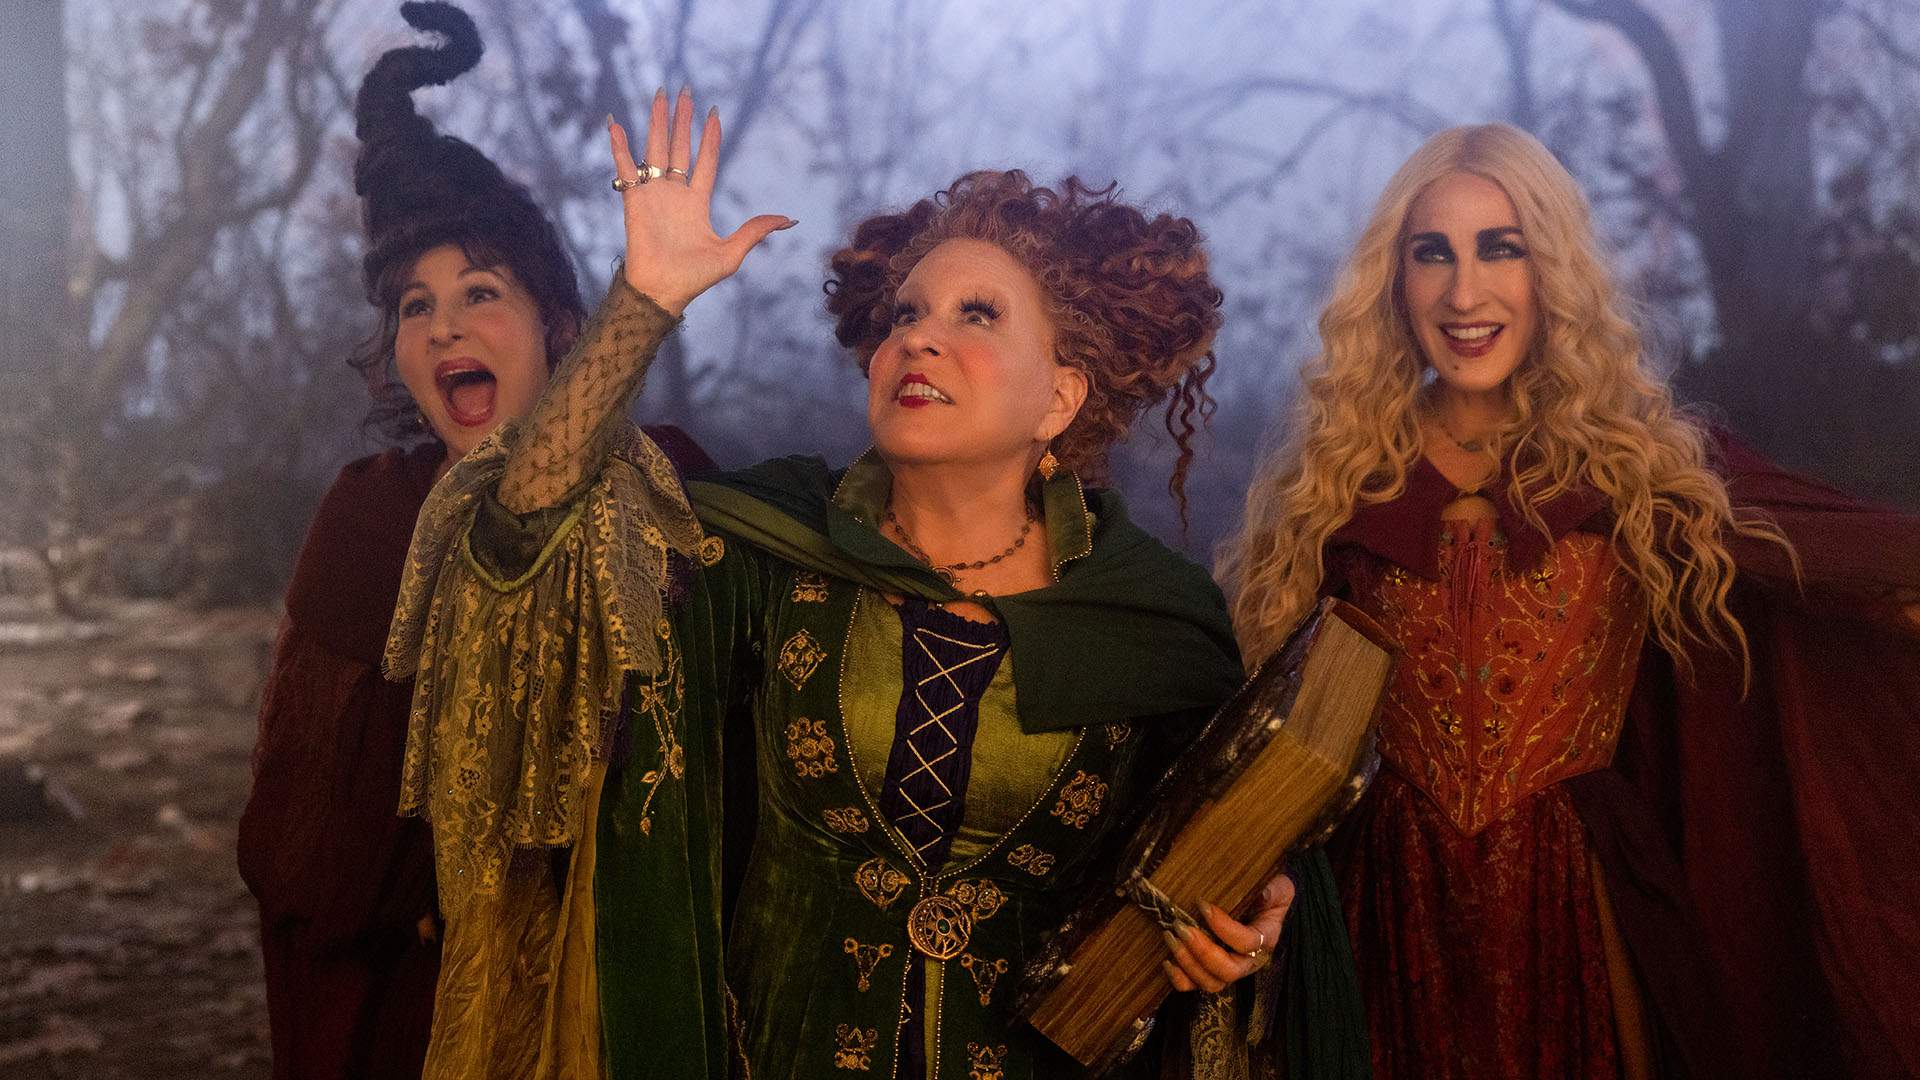 Lock Up Your Children: The Sanderson Sisters Are Back in the First Trailer for 'Hocus Pocus 2'